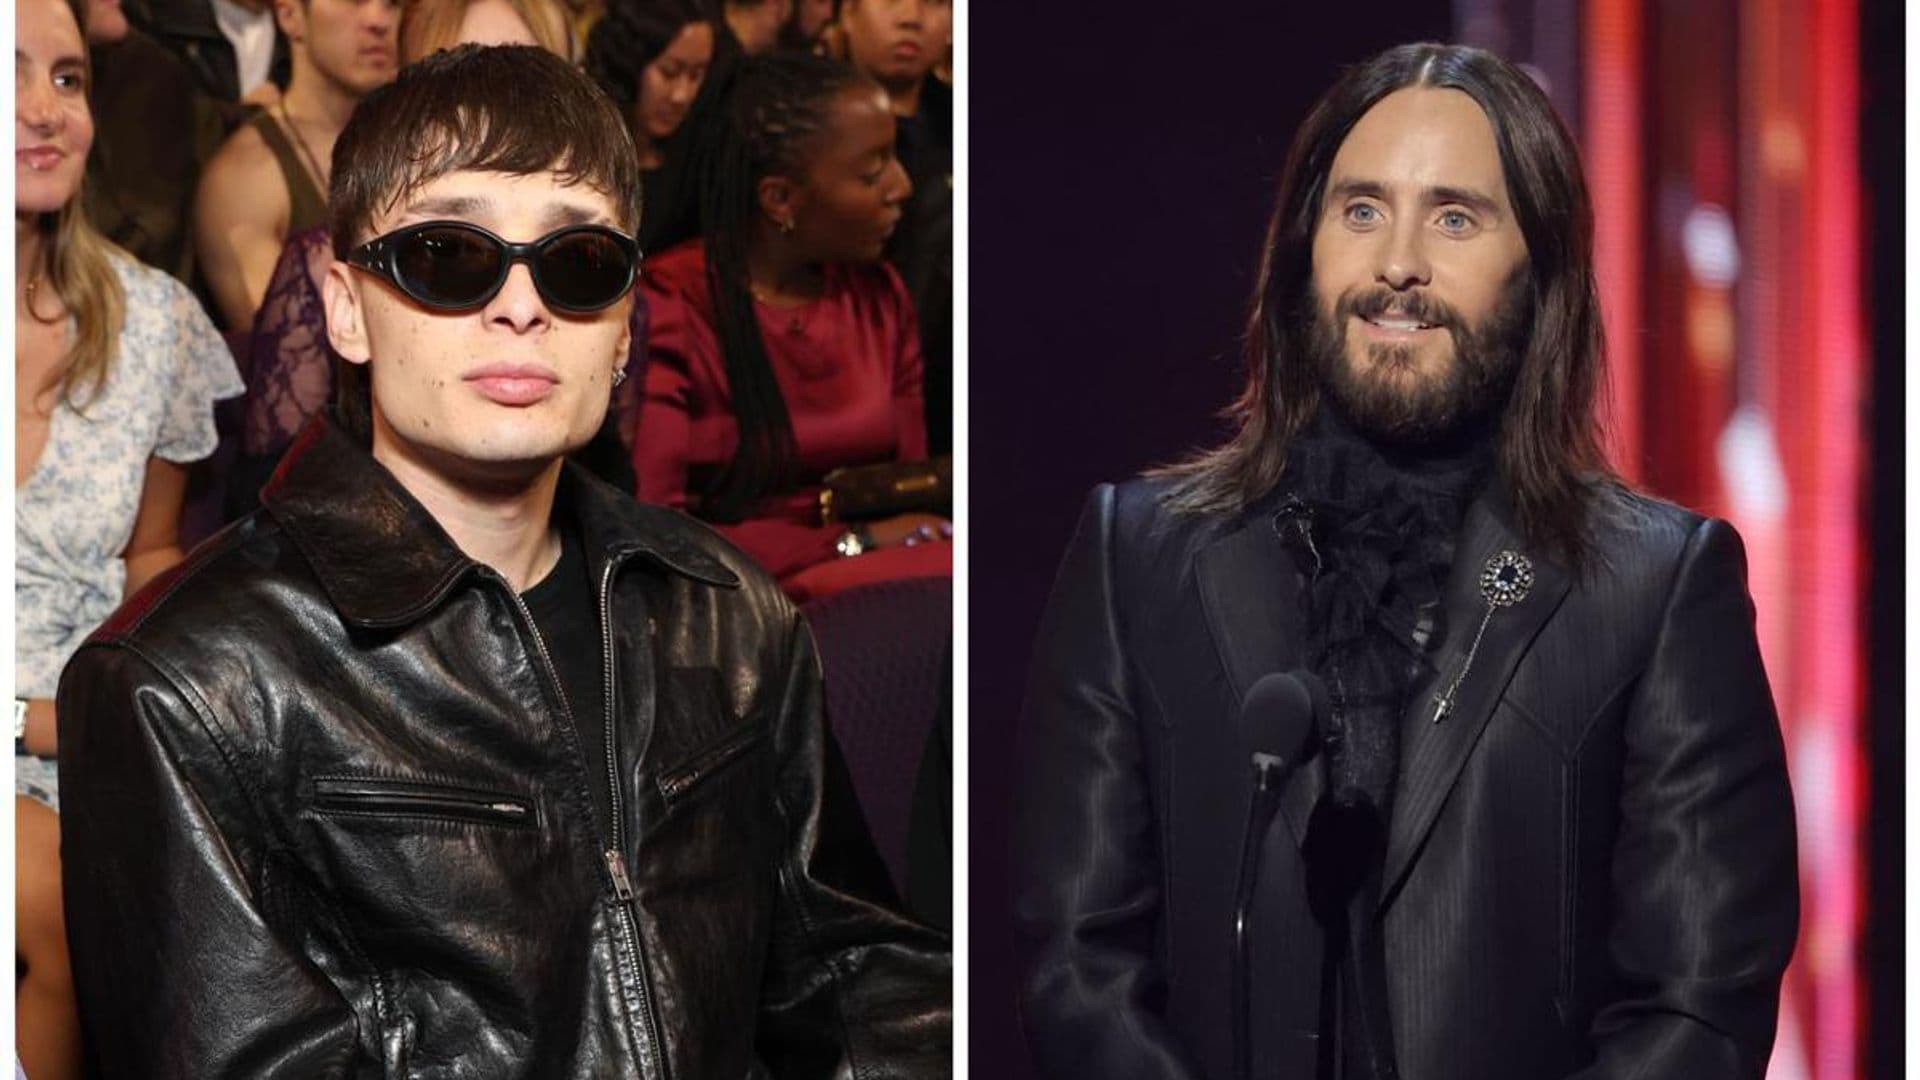 Are Peso Pluma and Jared Leto working on music together?